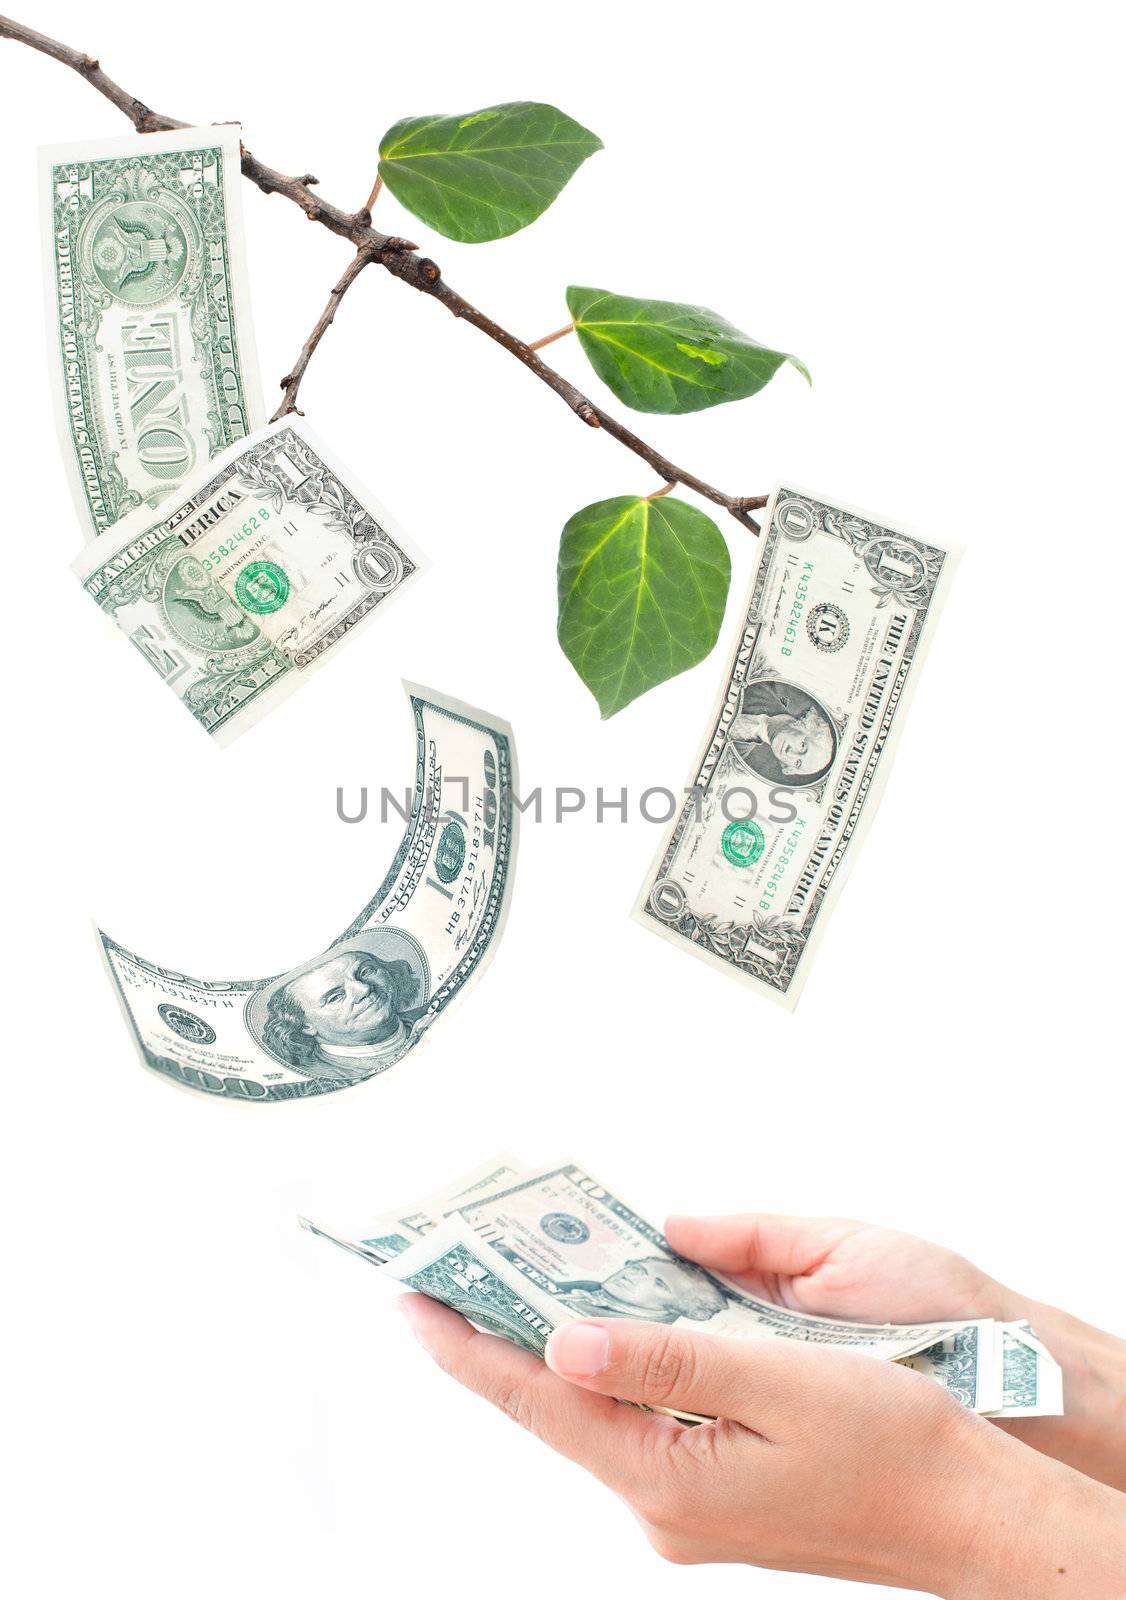 Hands collecting banknotes falling from a tree branch